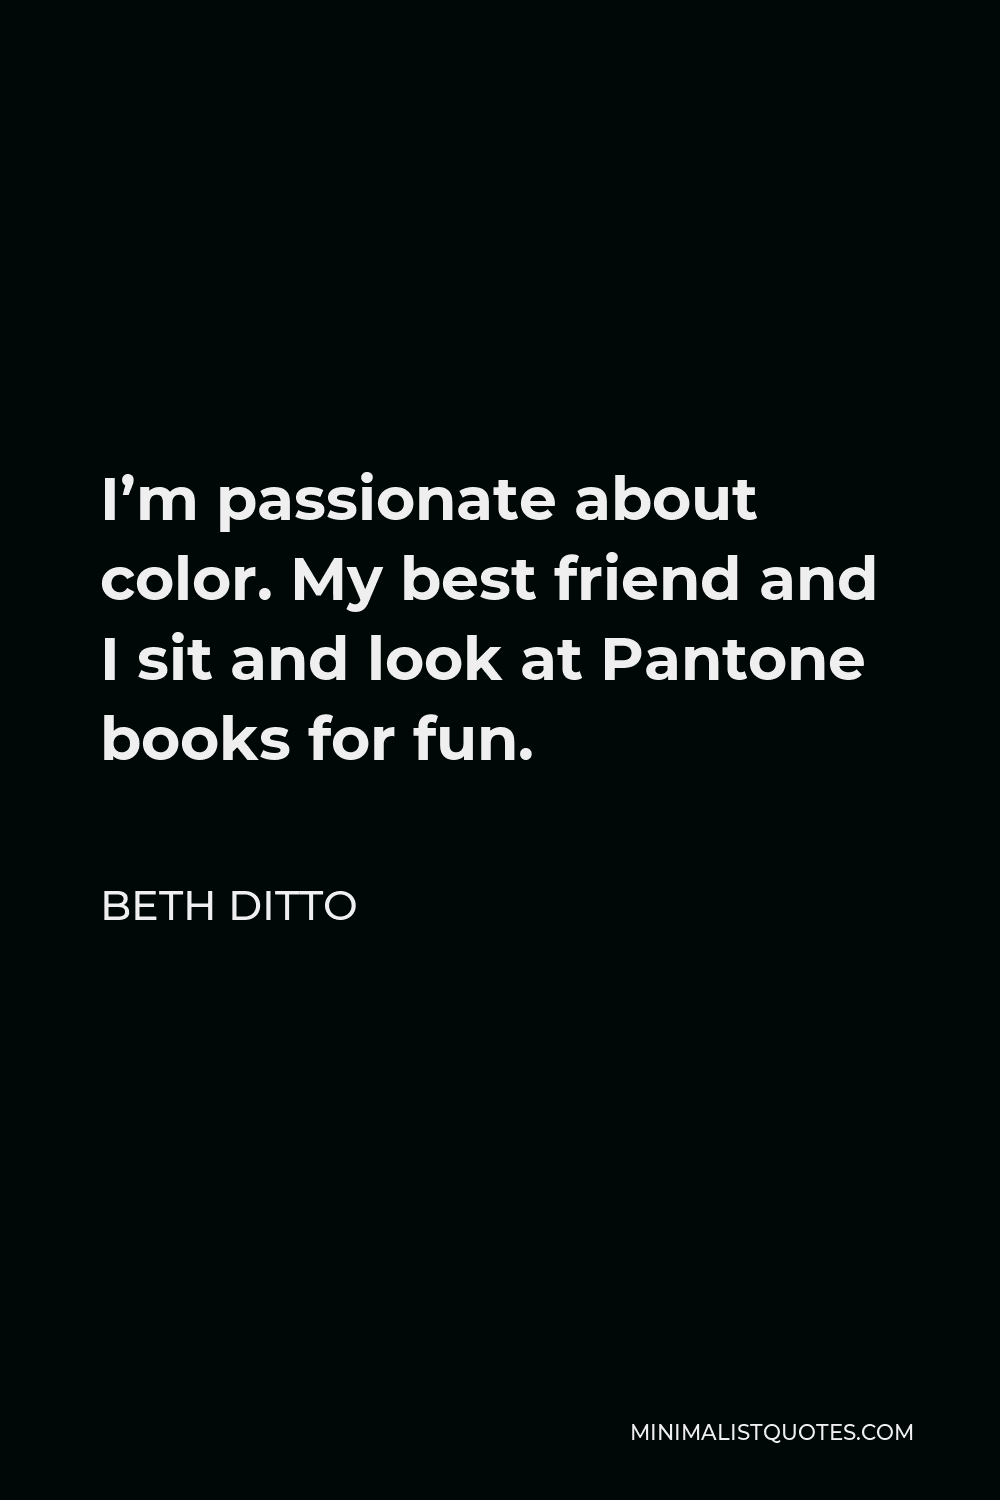 Beth Ditto Quote - I’m passionate about color. My best friend and I sit and look at Pantone books for fun.